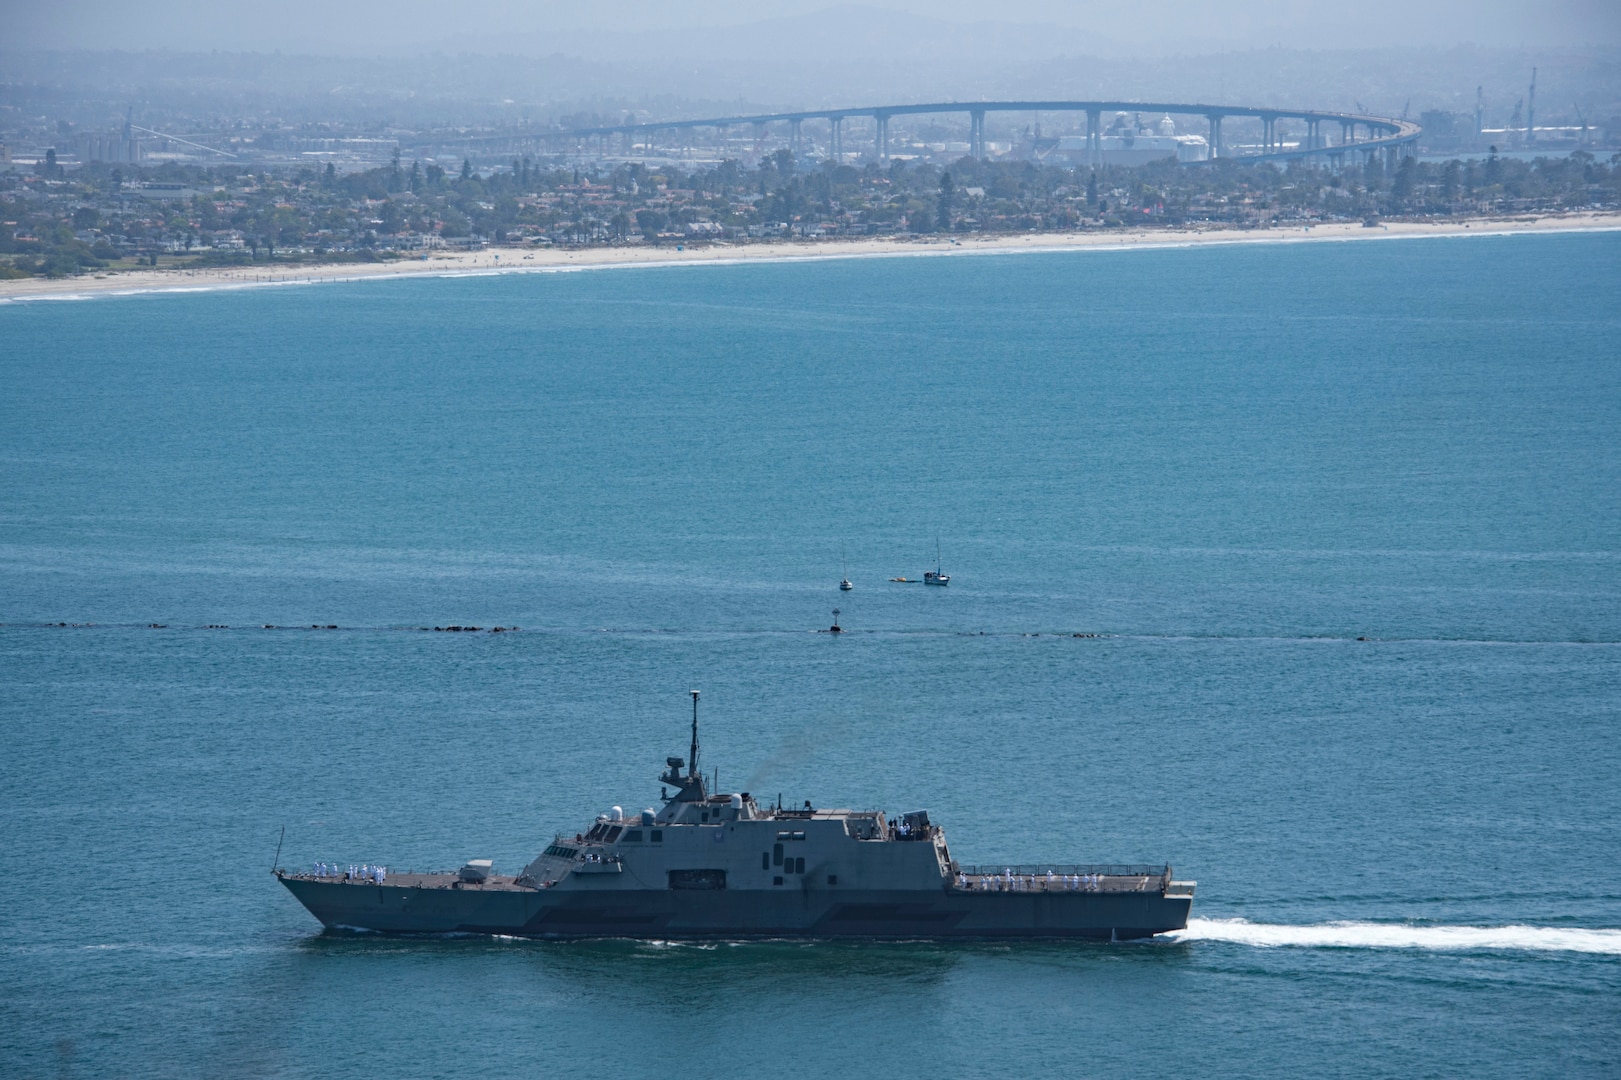 Littoral combat ship USS Freedom (LCS 1) returns to Naval Base San Diego from her final deployment, April 12.